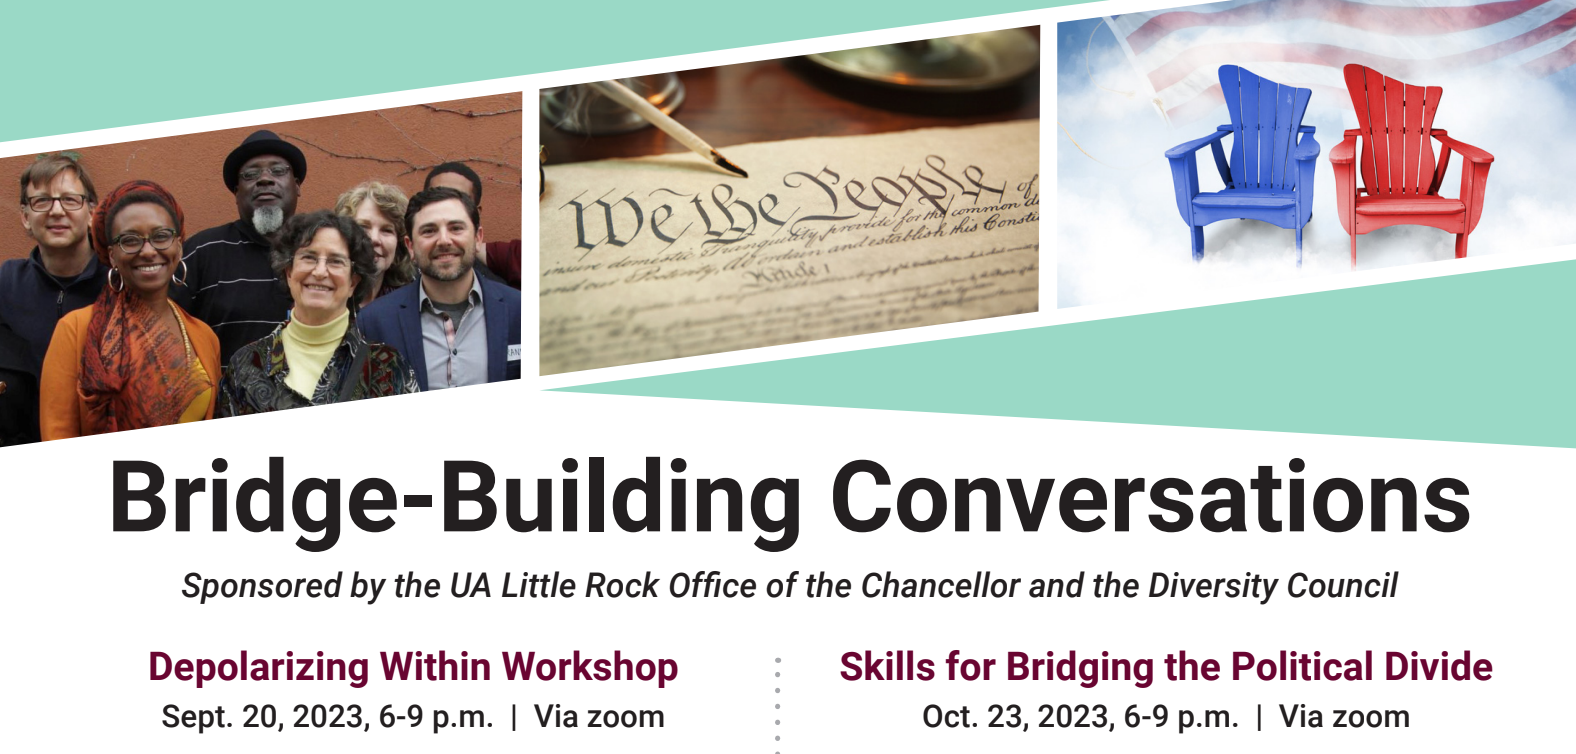 The UA Little Rock Diversity Council and the Office of the Chancellor are hosting the workshops, facilitated by Braver Angels, that are designed to equip participants with the skills needed to bridge divides and foster constructive dialogue. Both sessions are free and will be offered via Zoom.